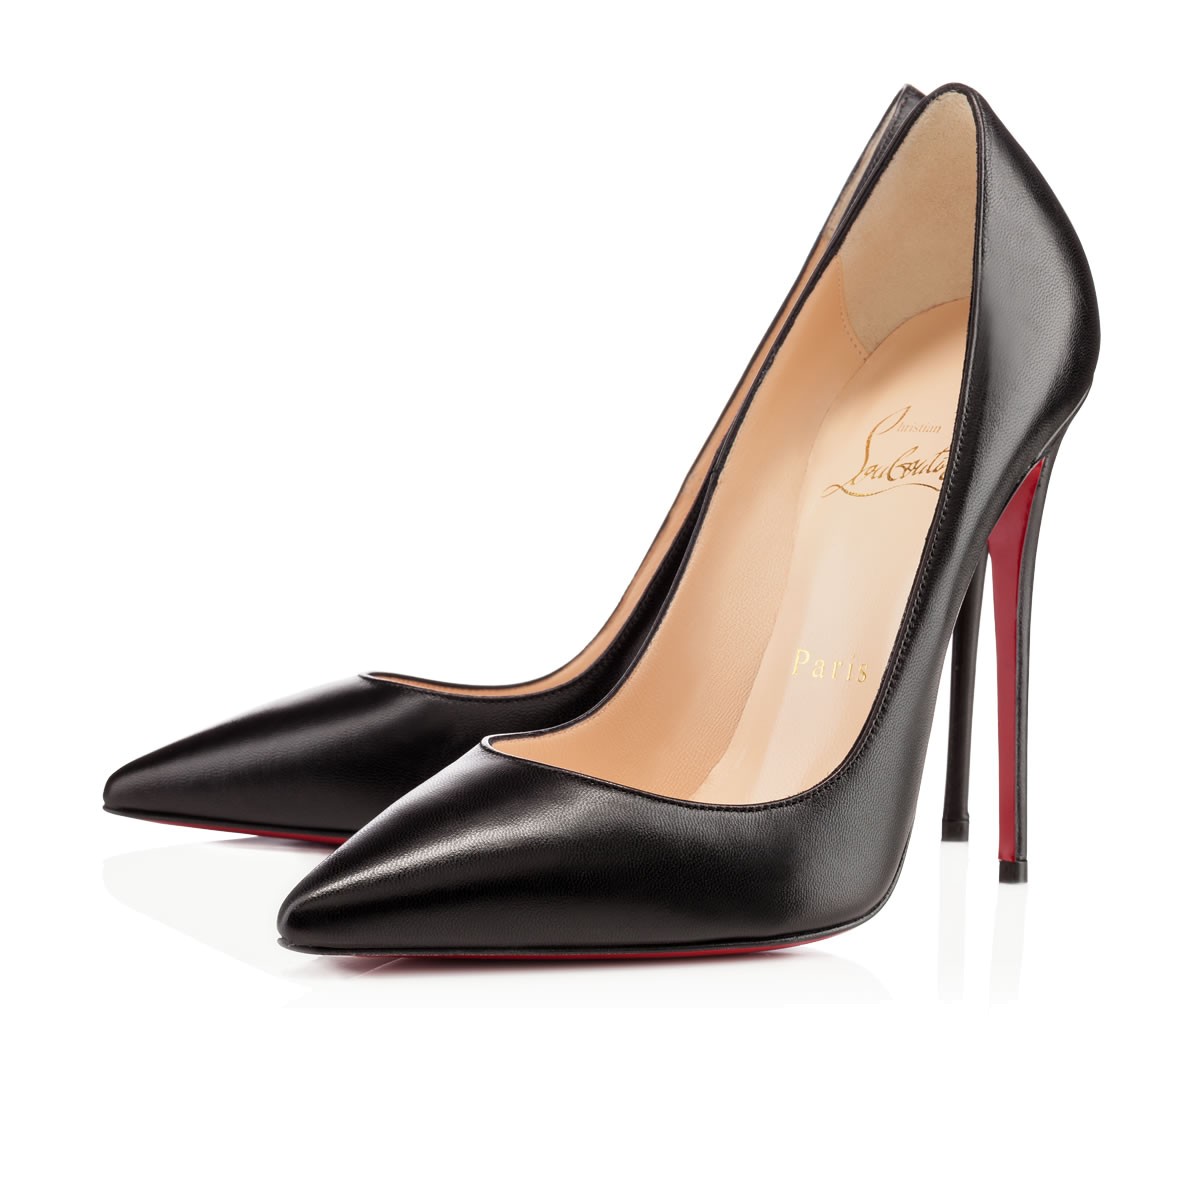 For Christian Louboutin, design is paramount